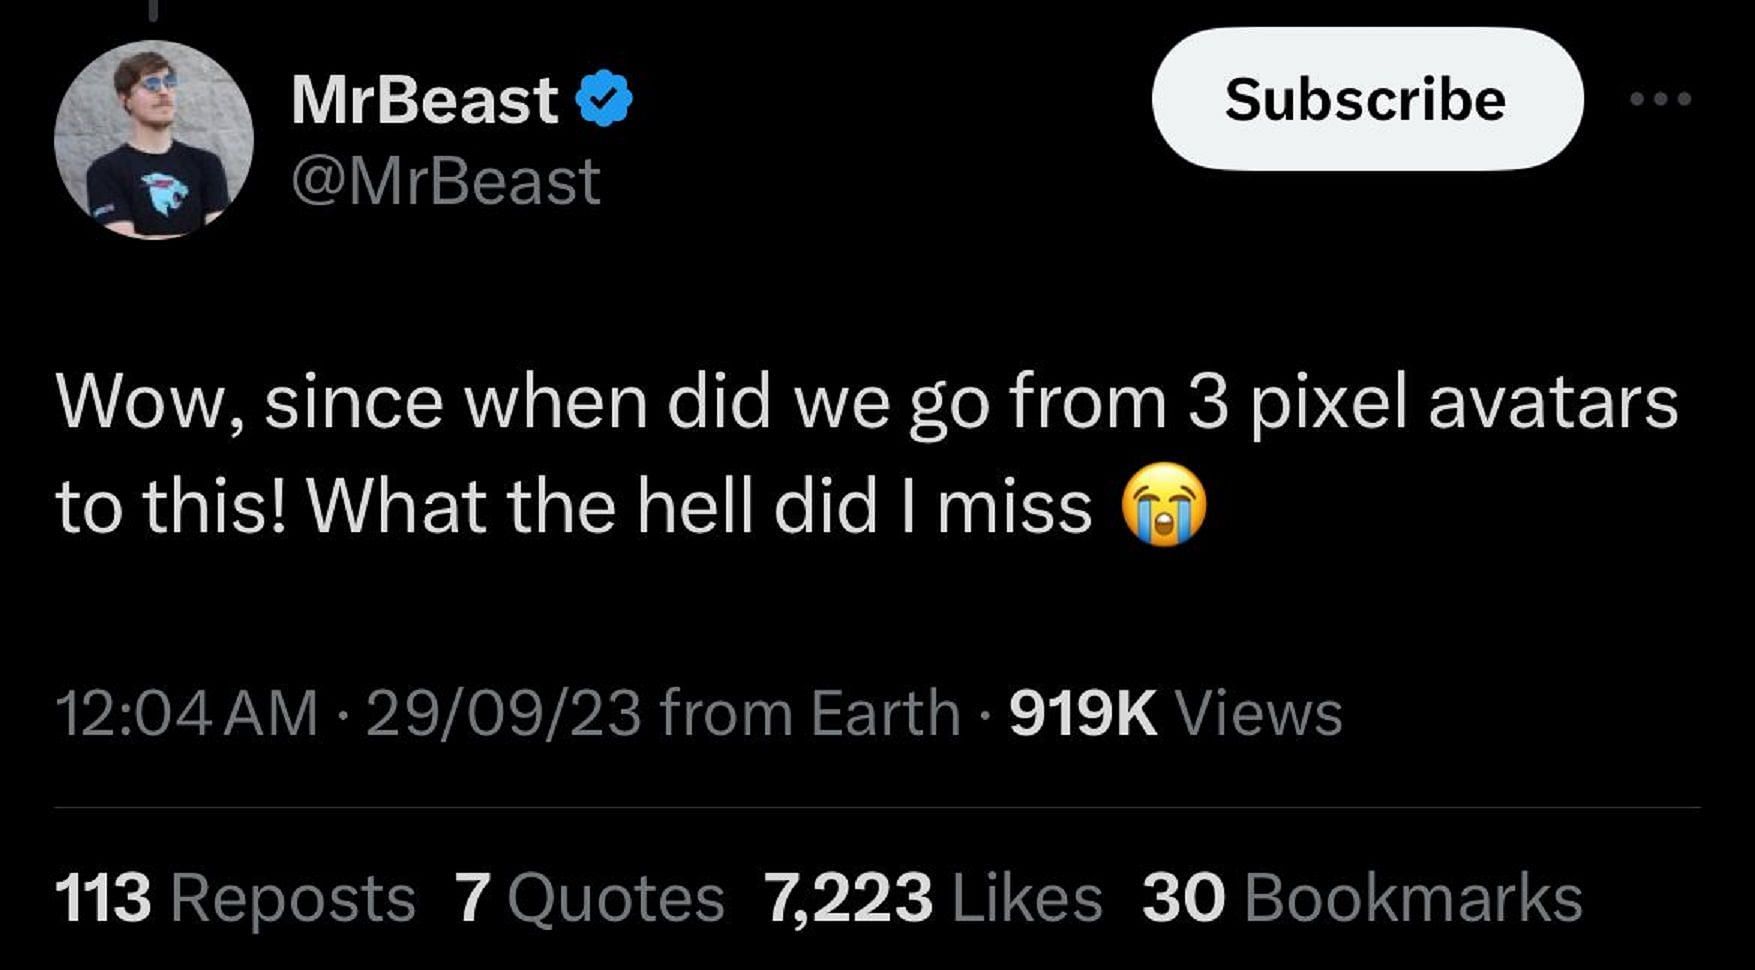 Lex Fridman on X: I got to hangout with @MrBeast yesterday, and discuss  some fascinating ideas about the future of  and Twitter. He and team  are brilliant and inspiring. We also